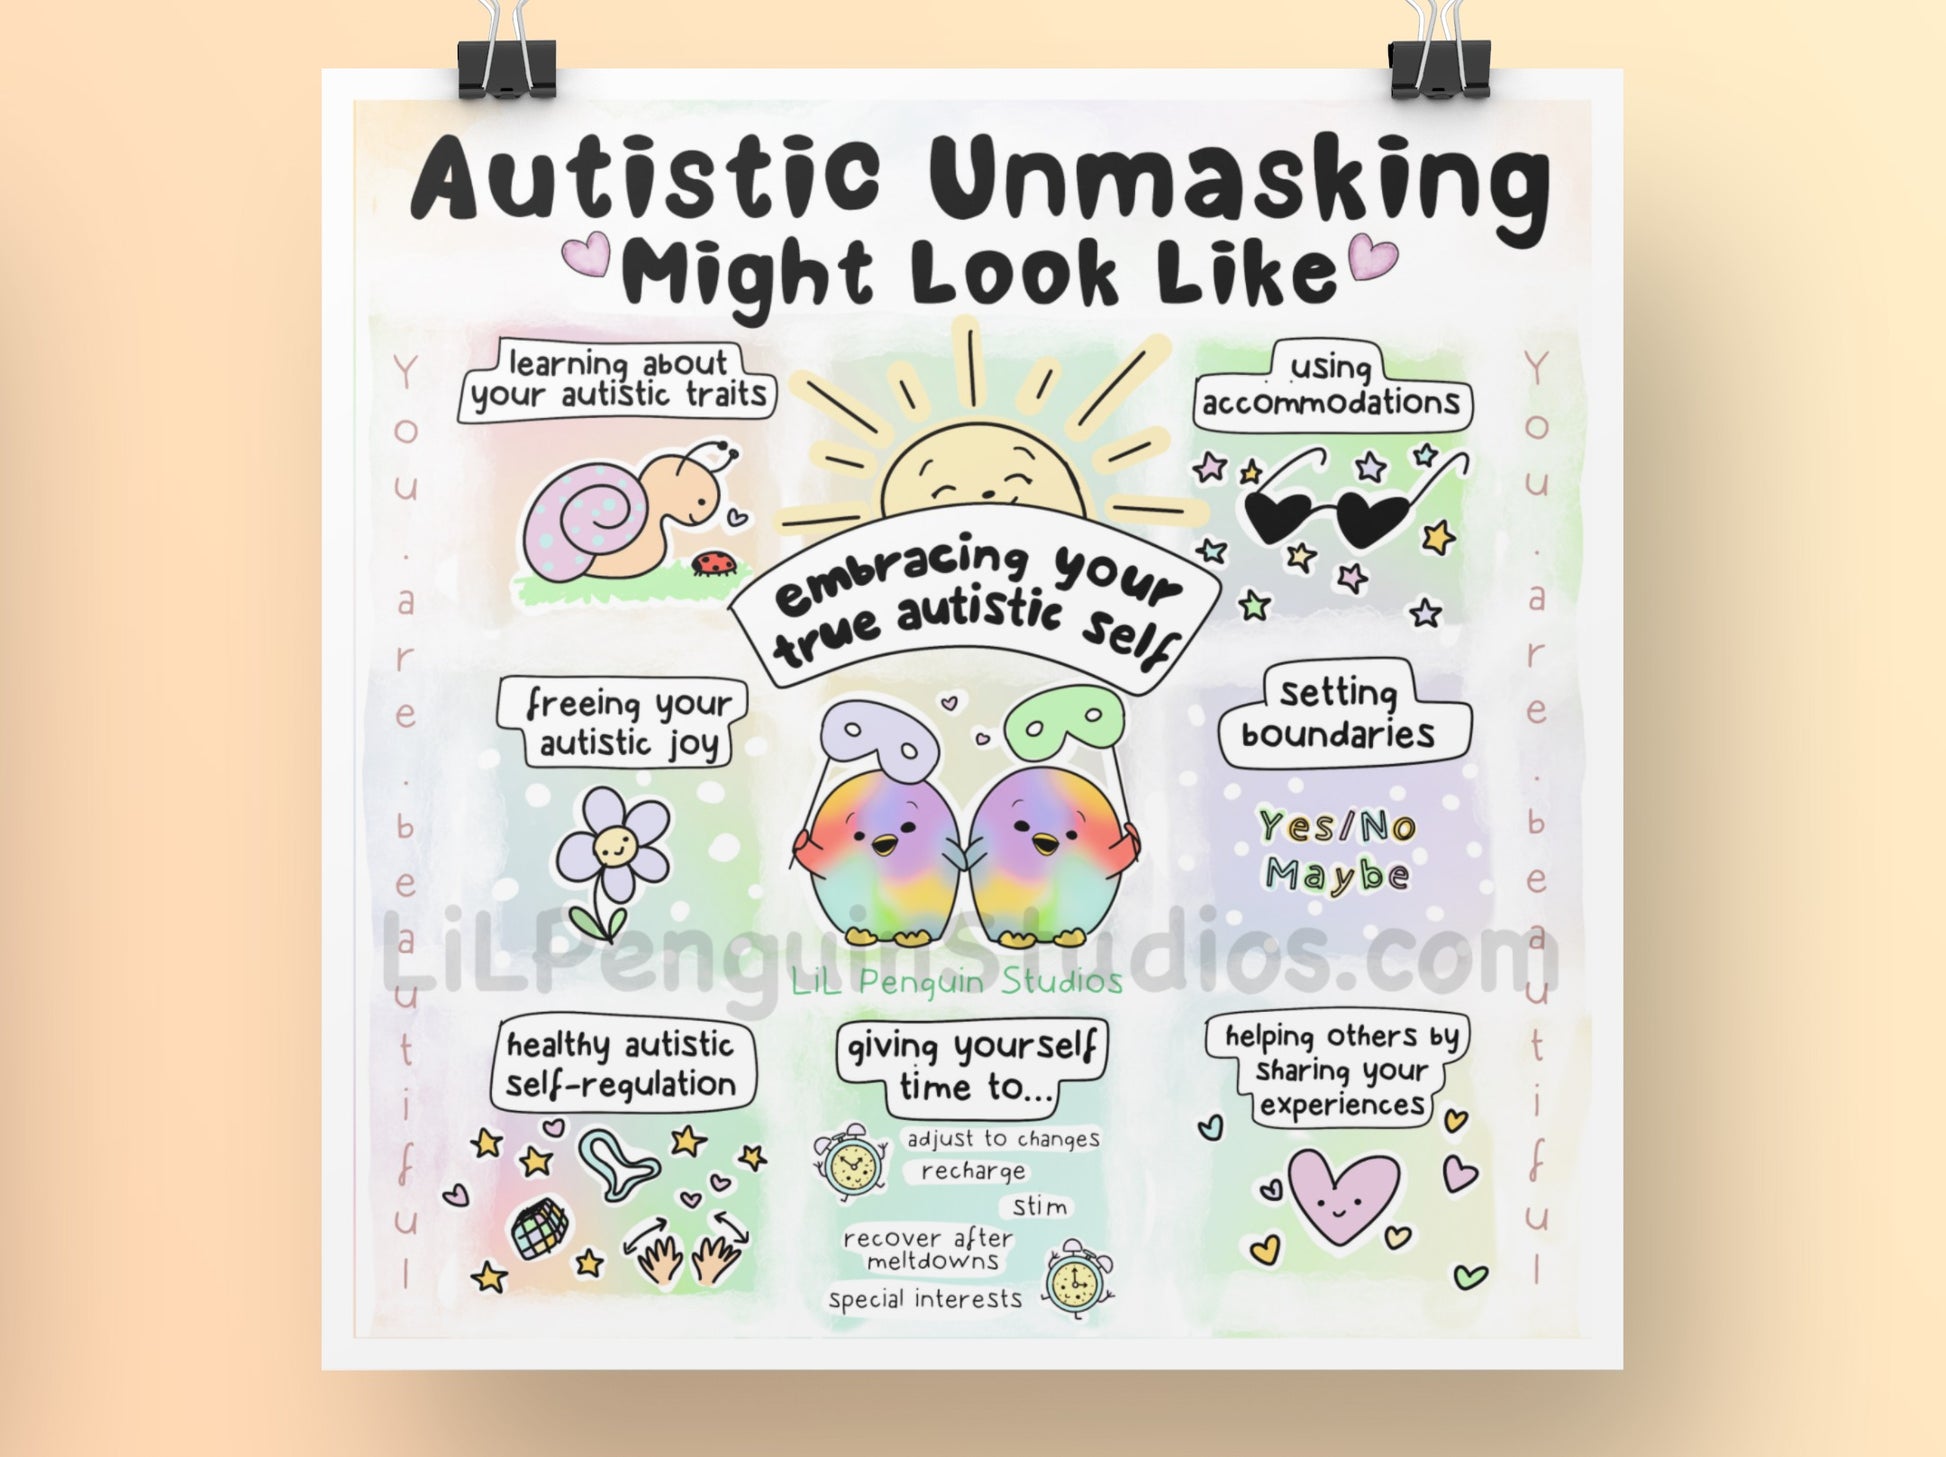 Autistic Unmasking Digital Art Print about embracing your authentic autistic self. With private practice licence.